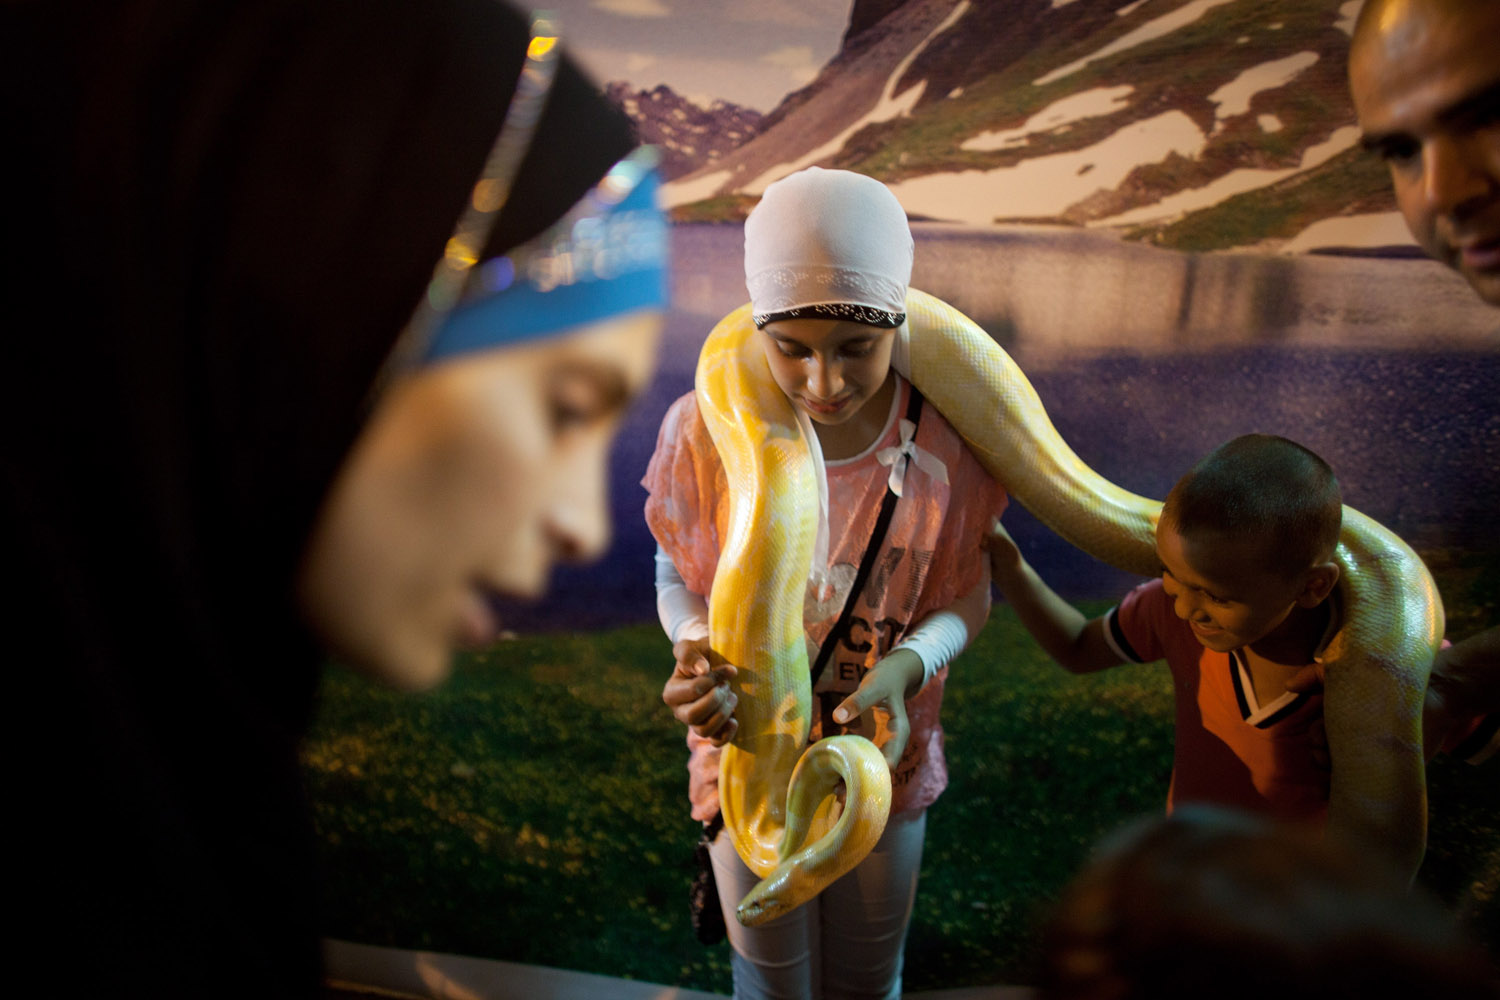 Aug. 20, 2012. Israeli Arabs get their picture taken with a pet snake at an amusement park as Muslims celebrated the Eid al-Fitr holiday, which marks the end of the holy fasting month of Ramadan in Acre, Israel.